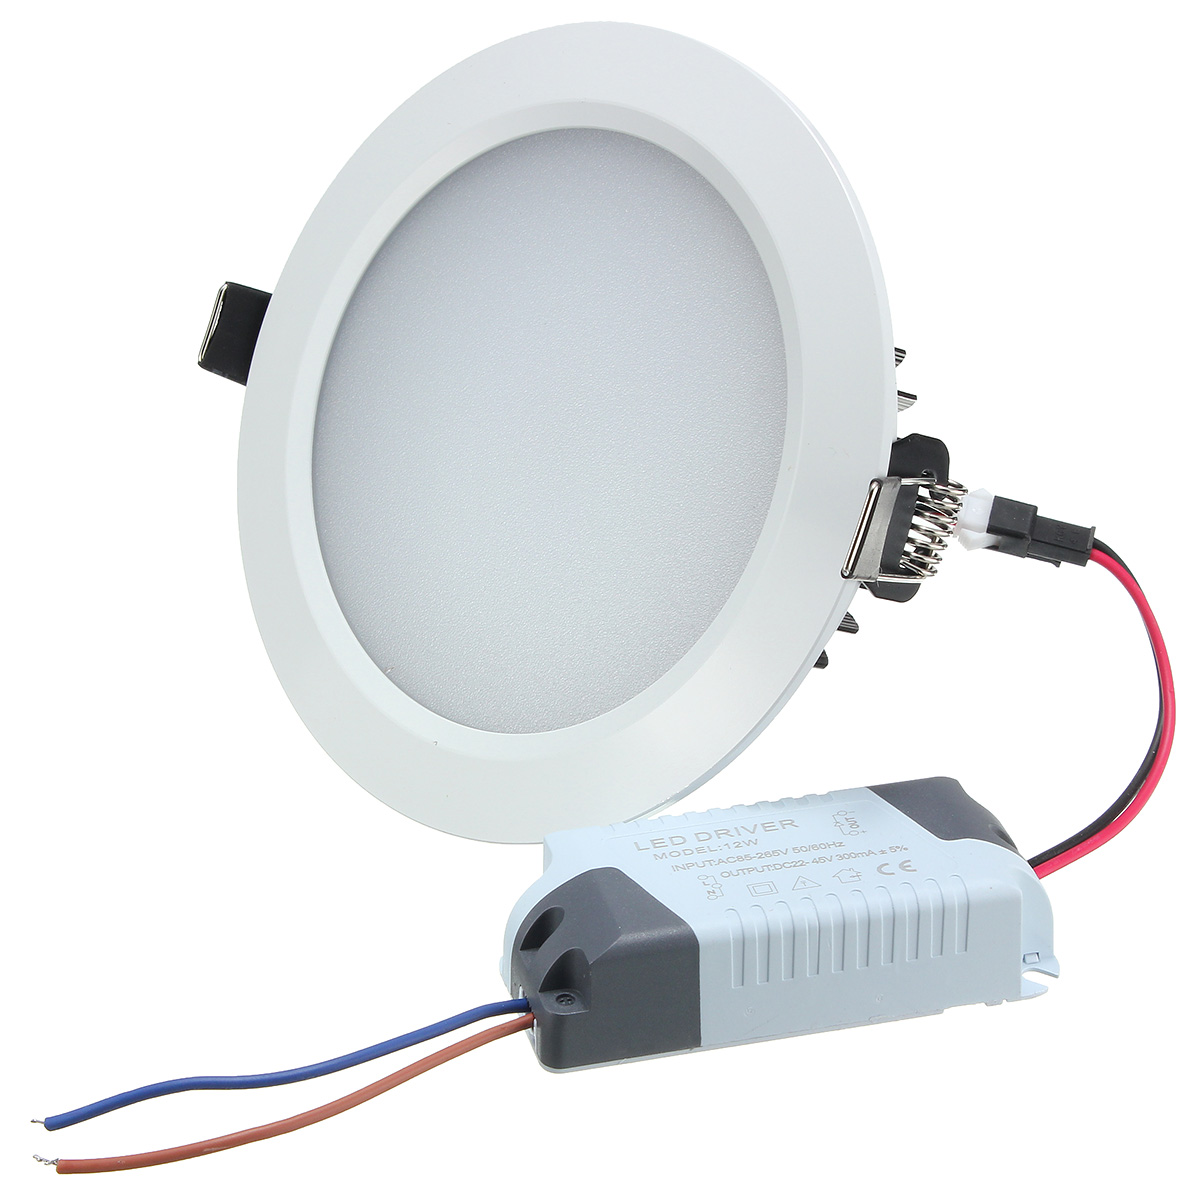 Find KINGSO 12W 85 265V Ceiling Light Baffle Recessed Spotlight LED Light 1200LM for Sale on Gipsybee.com with cryptocurrencies